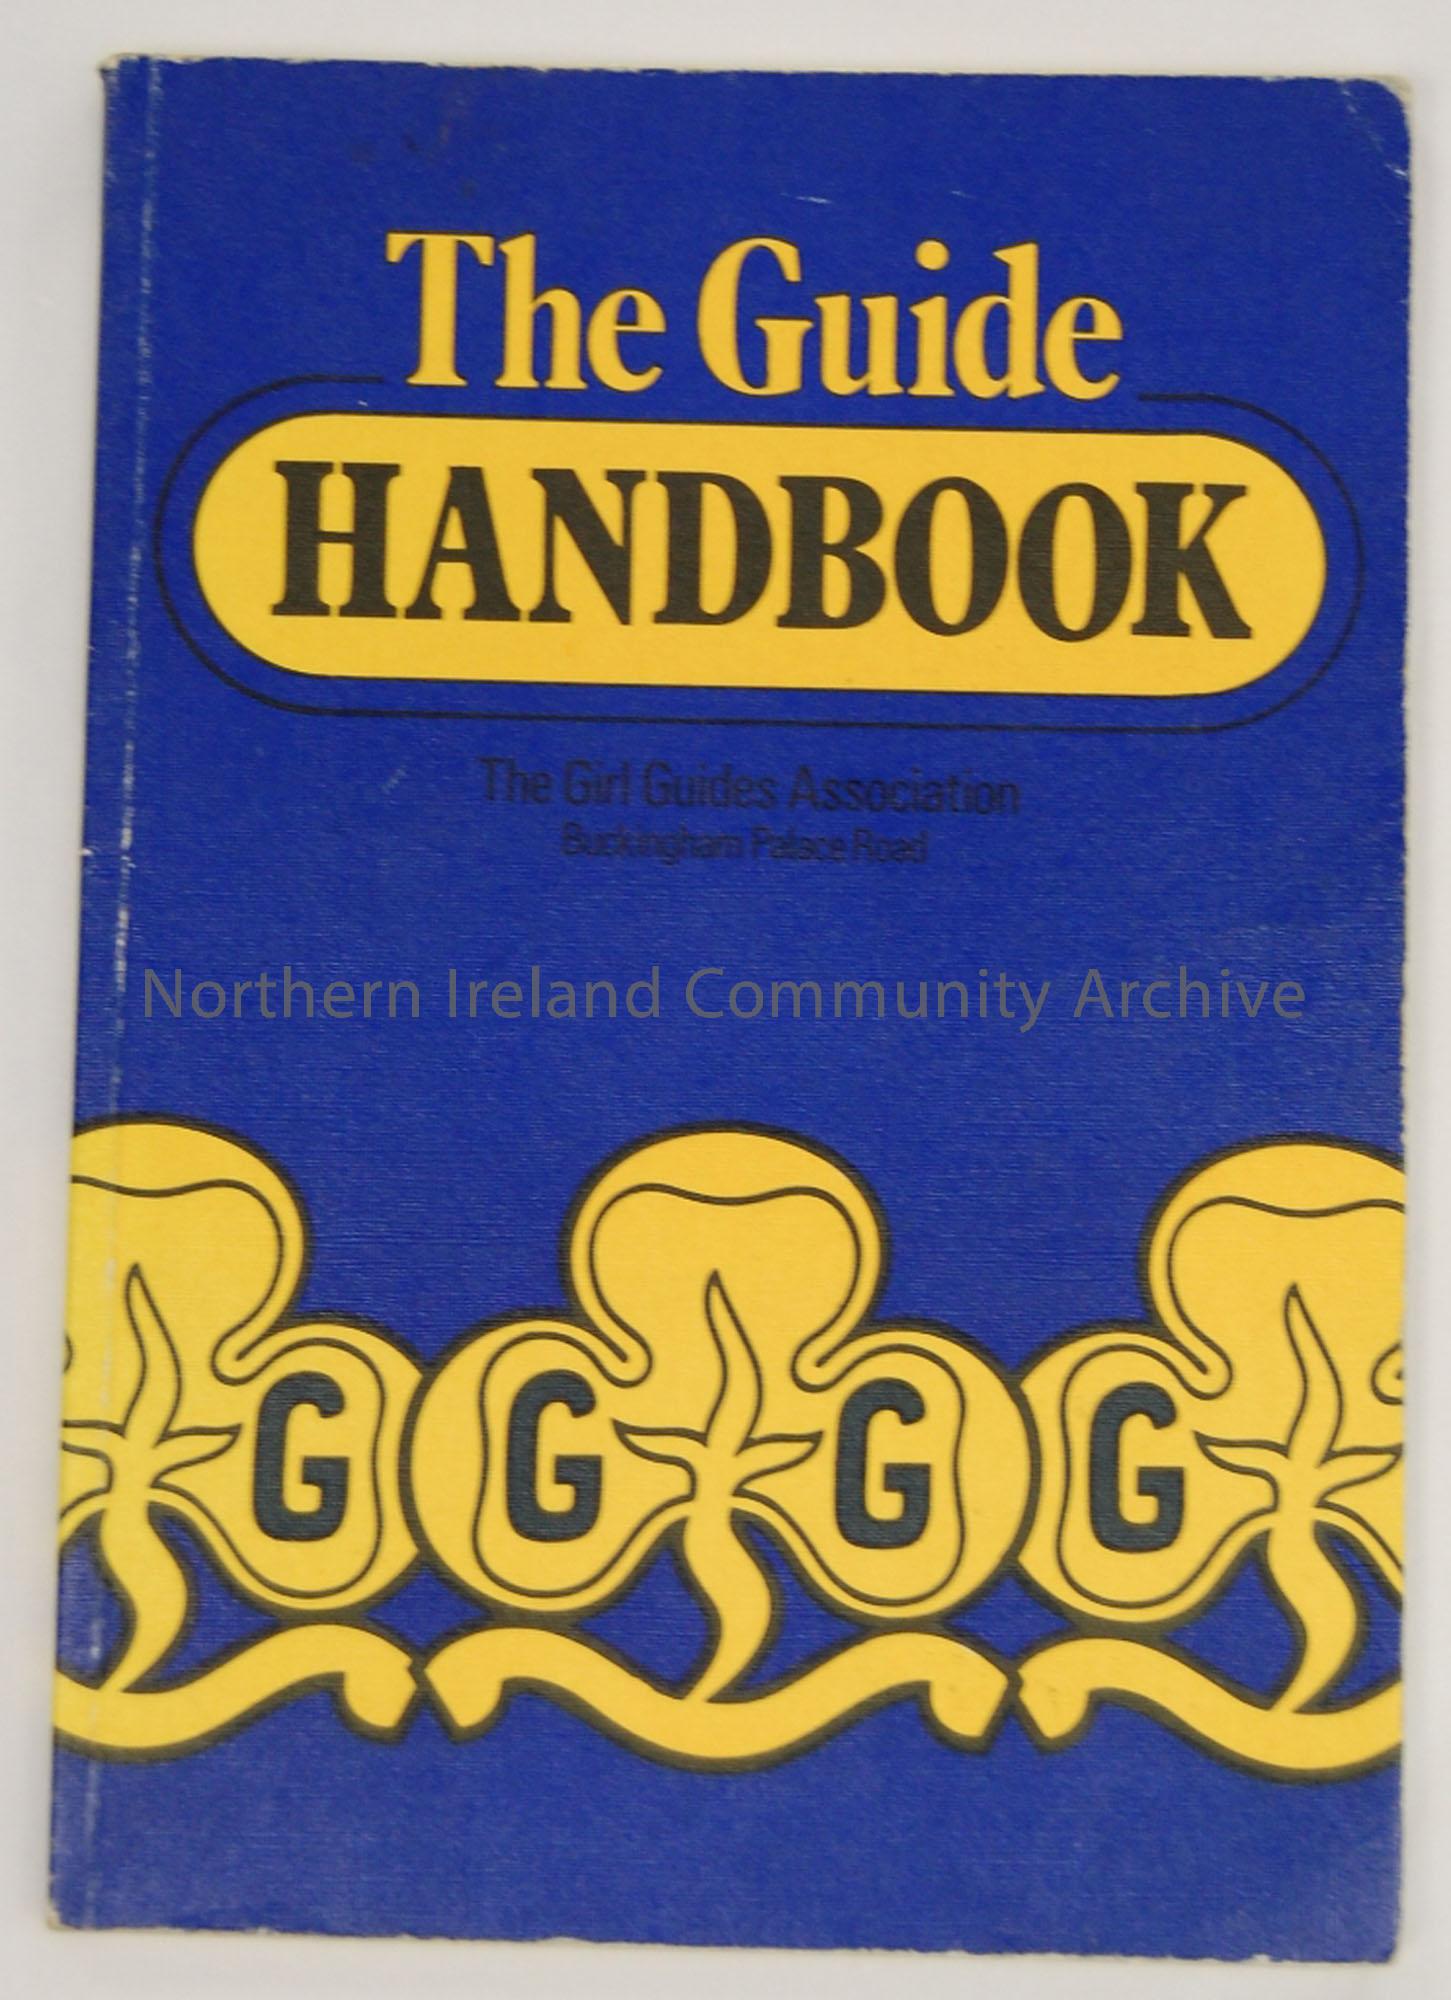 The Girl Guide Association. The Guide handbook. 1983. Price 95p.